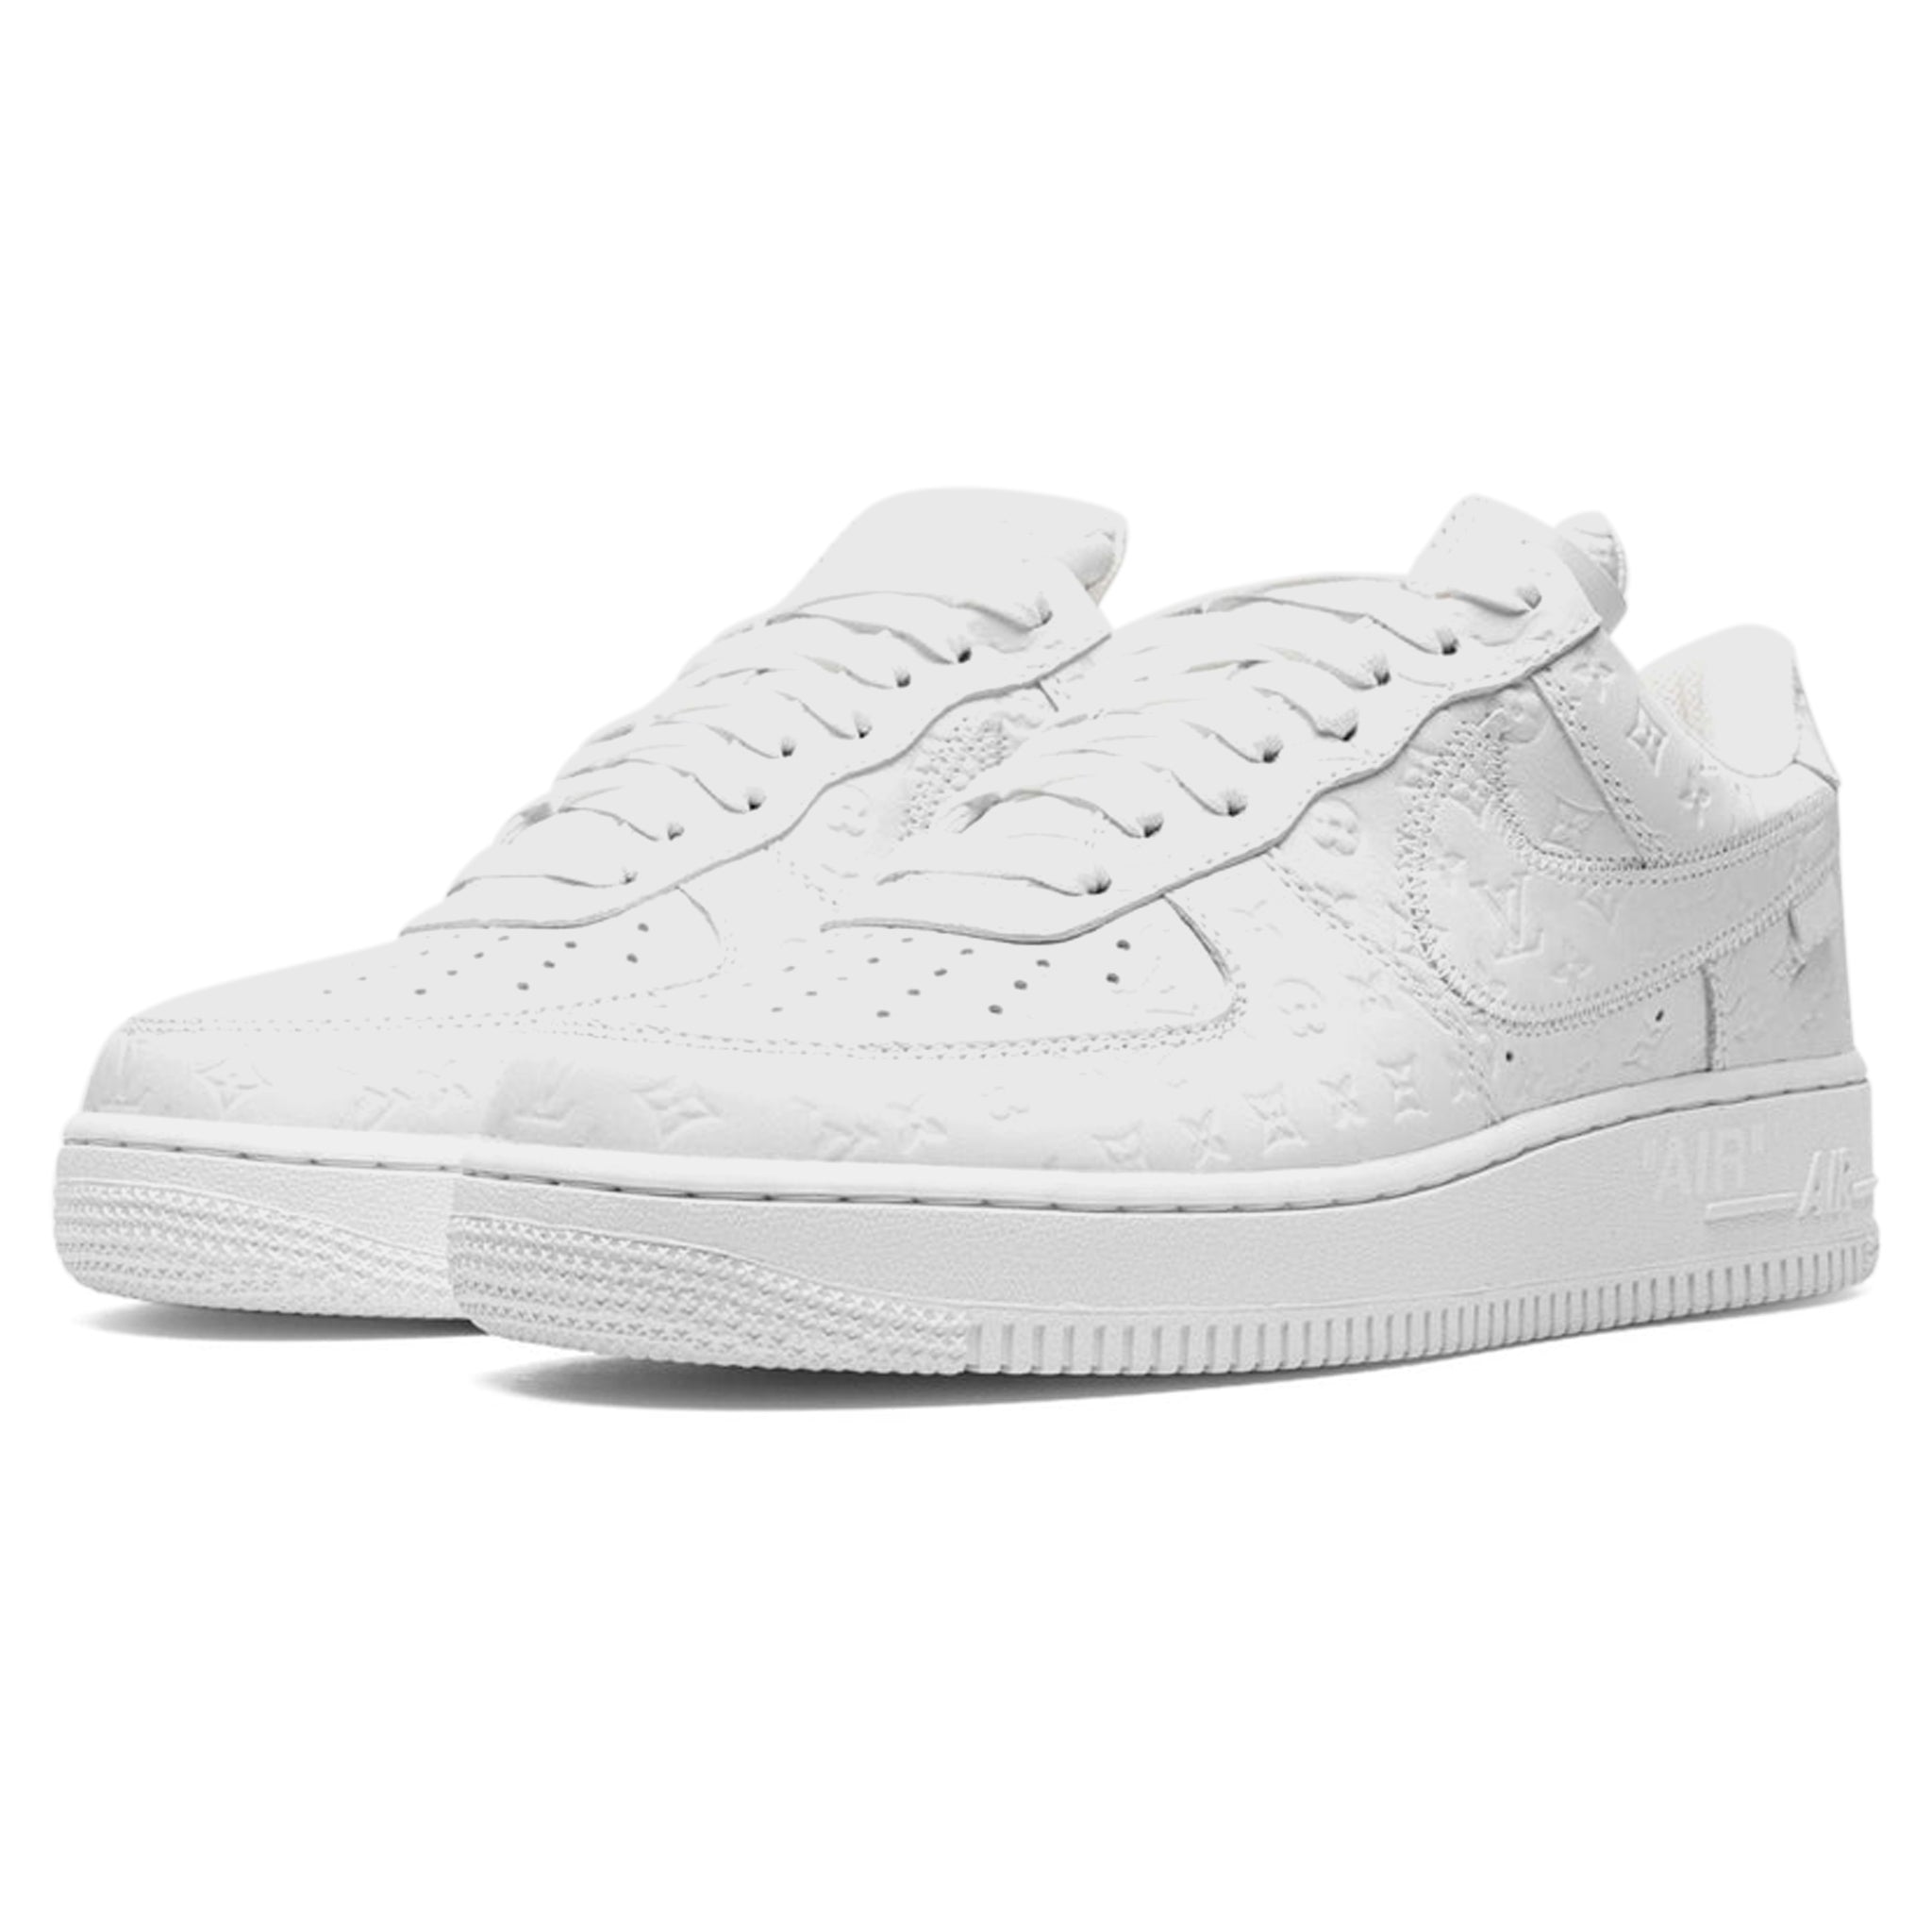 Louis Vuitton Nike Air Force 1 Low White Red